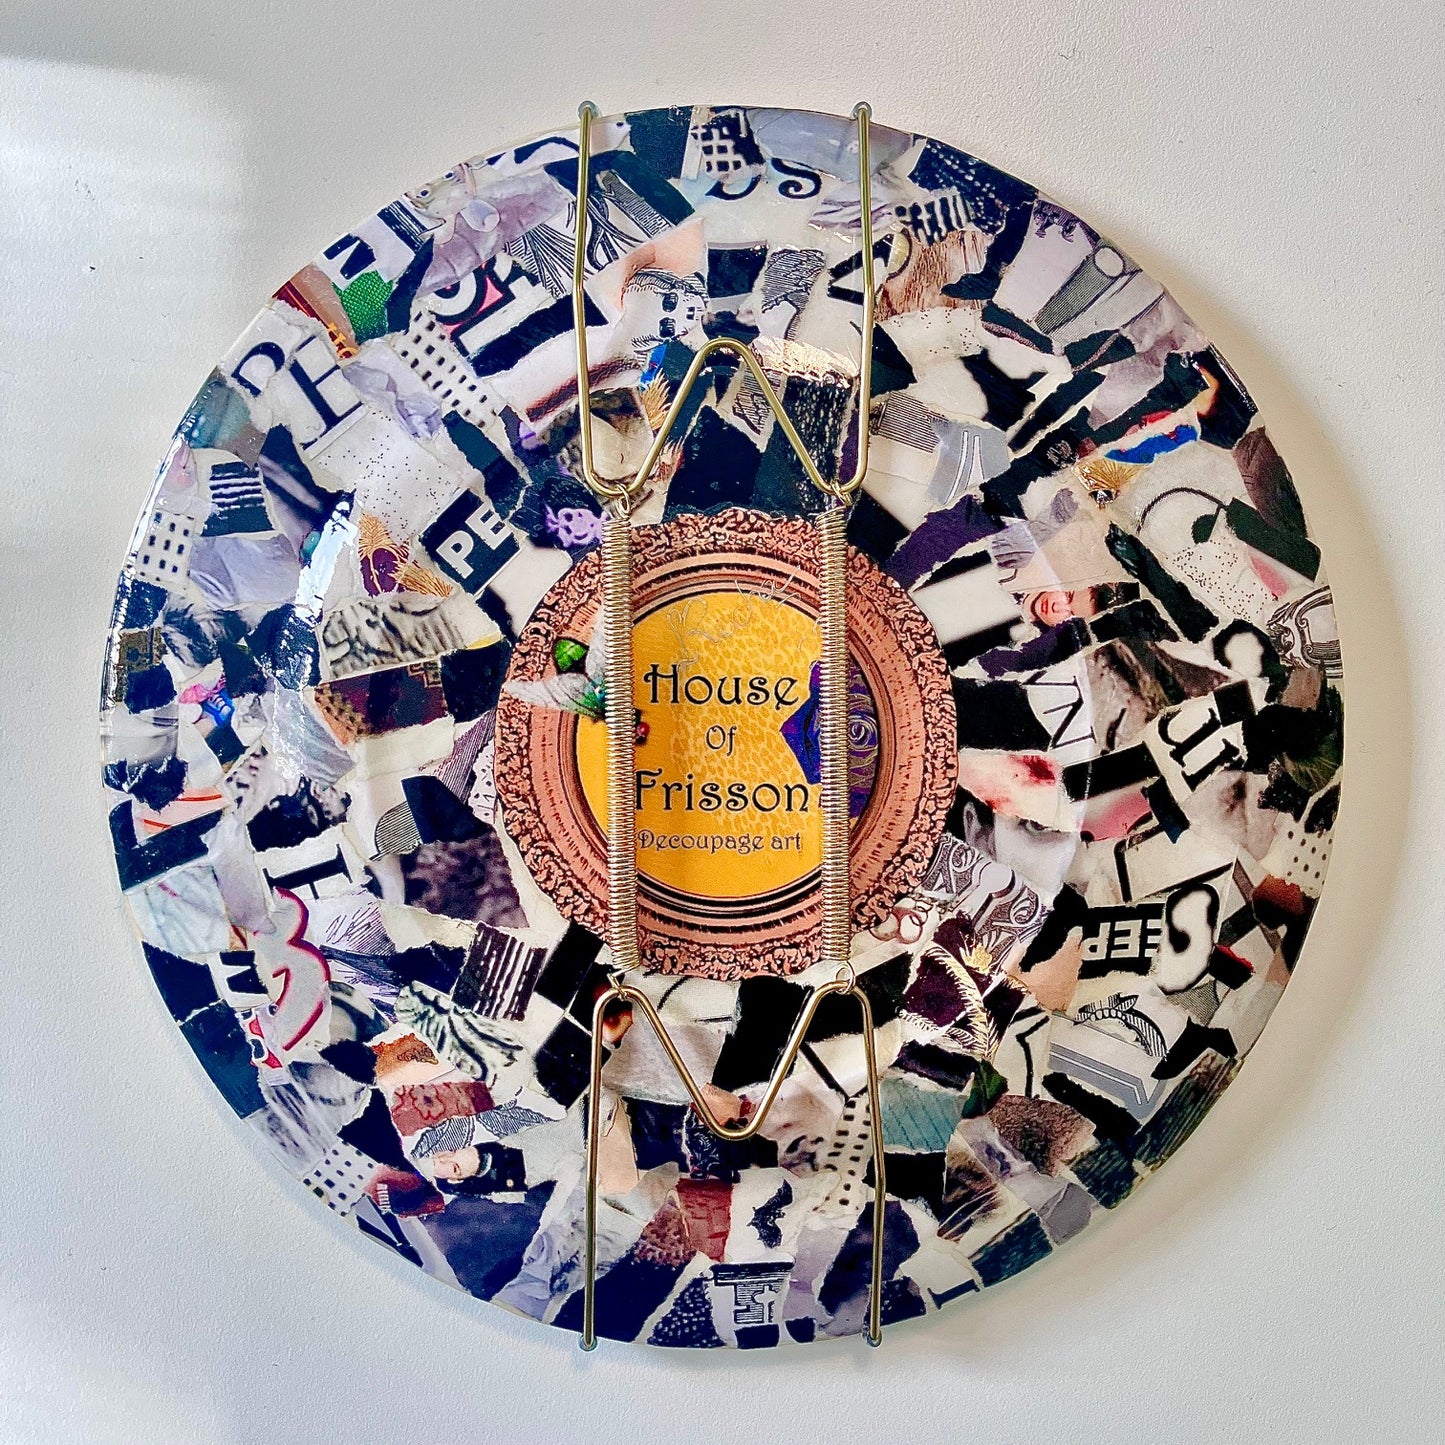 Yellow Upcycled Wall Plate "I Solemnly Swear That I Am Up To No Good" - by House of Frisson